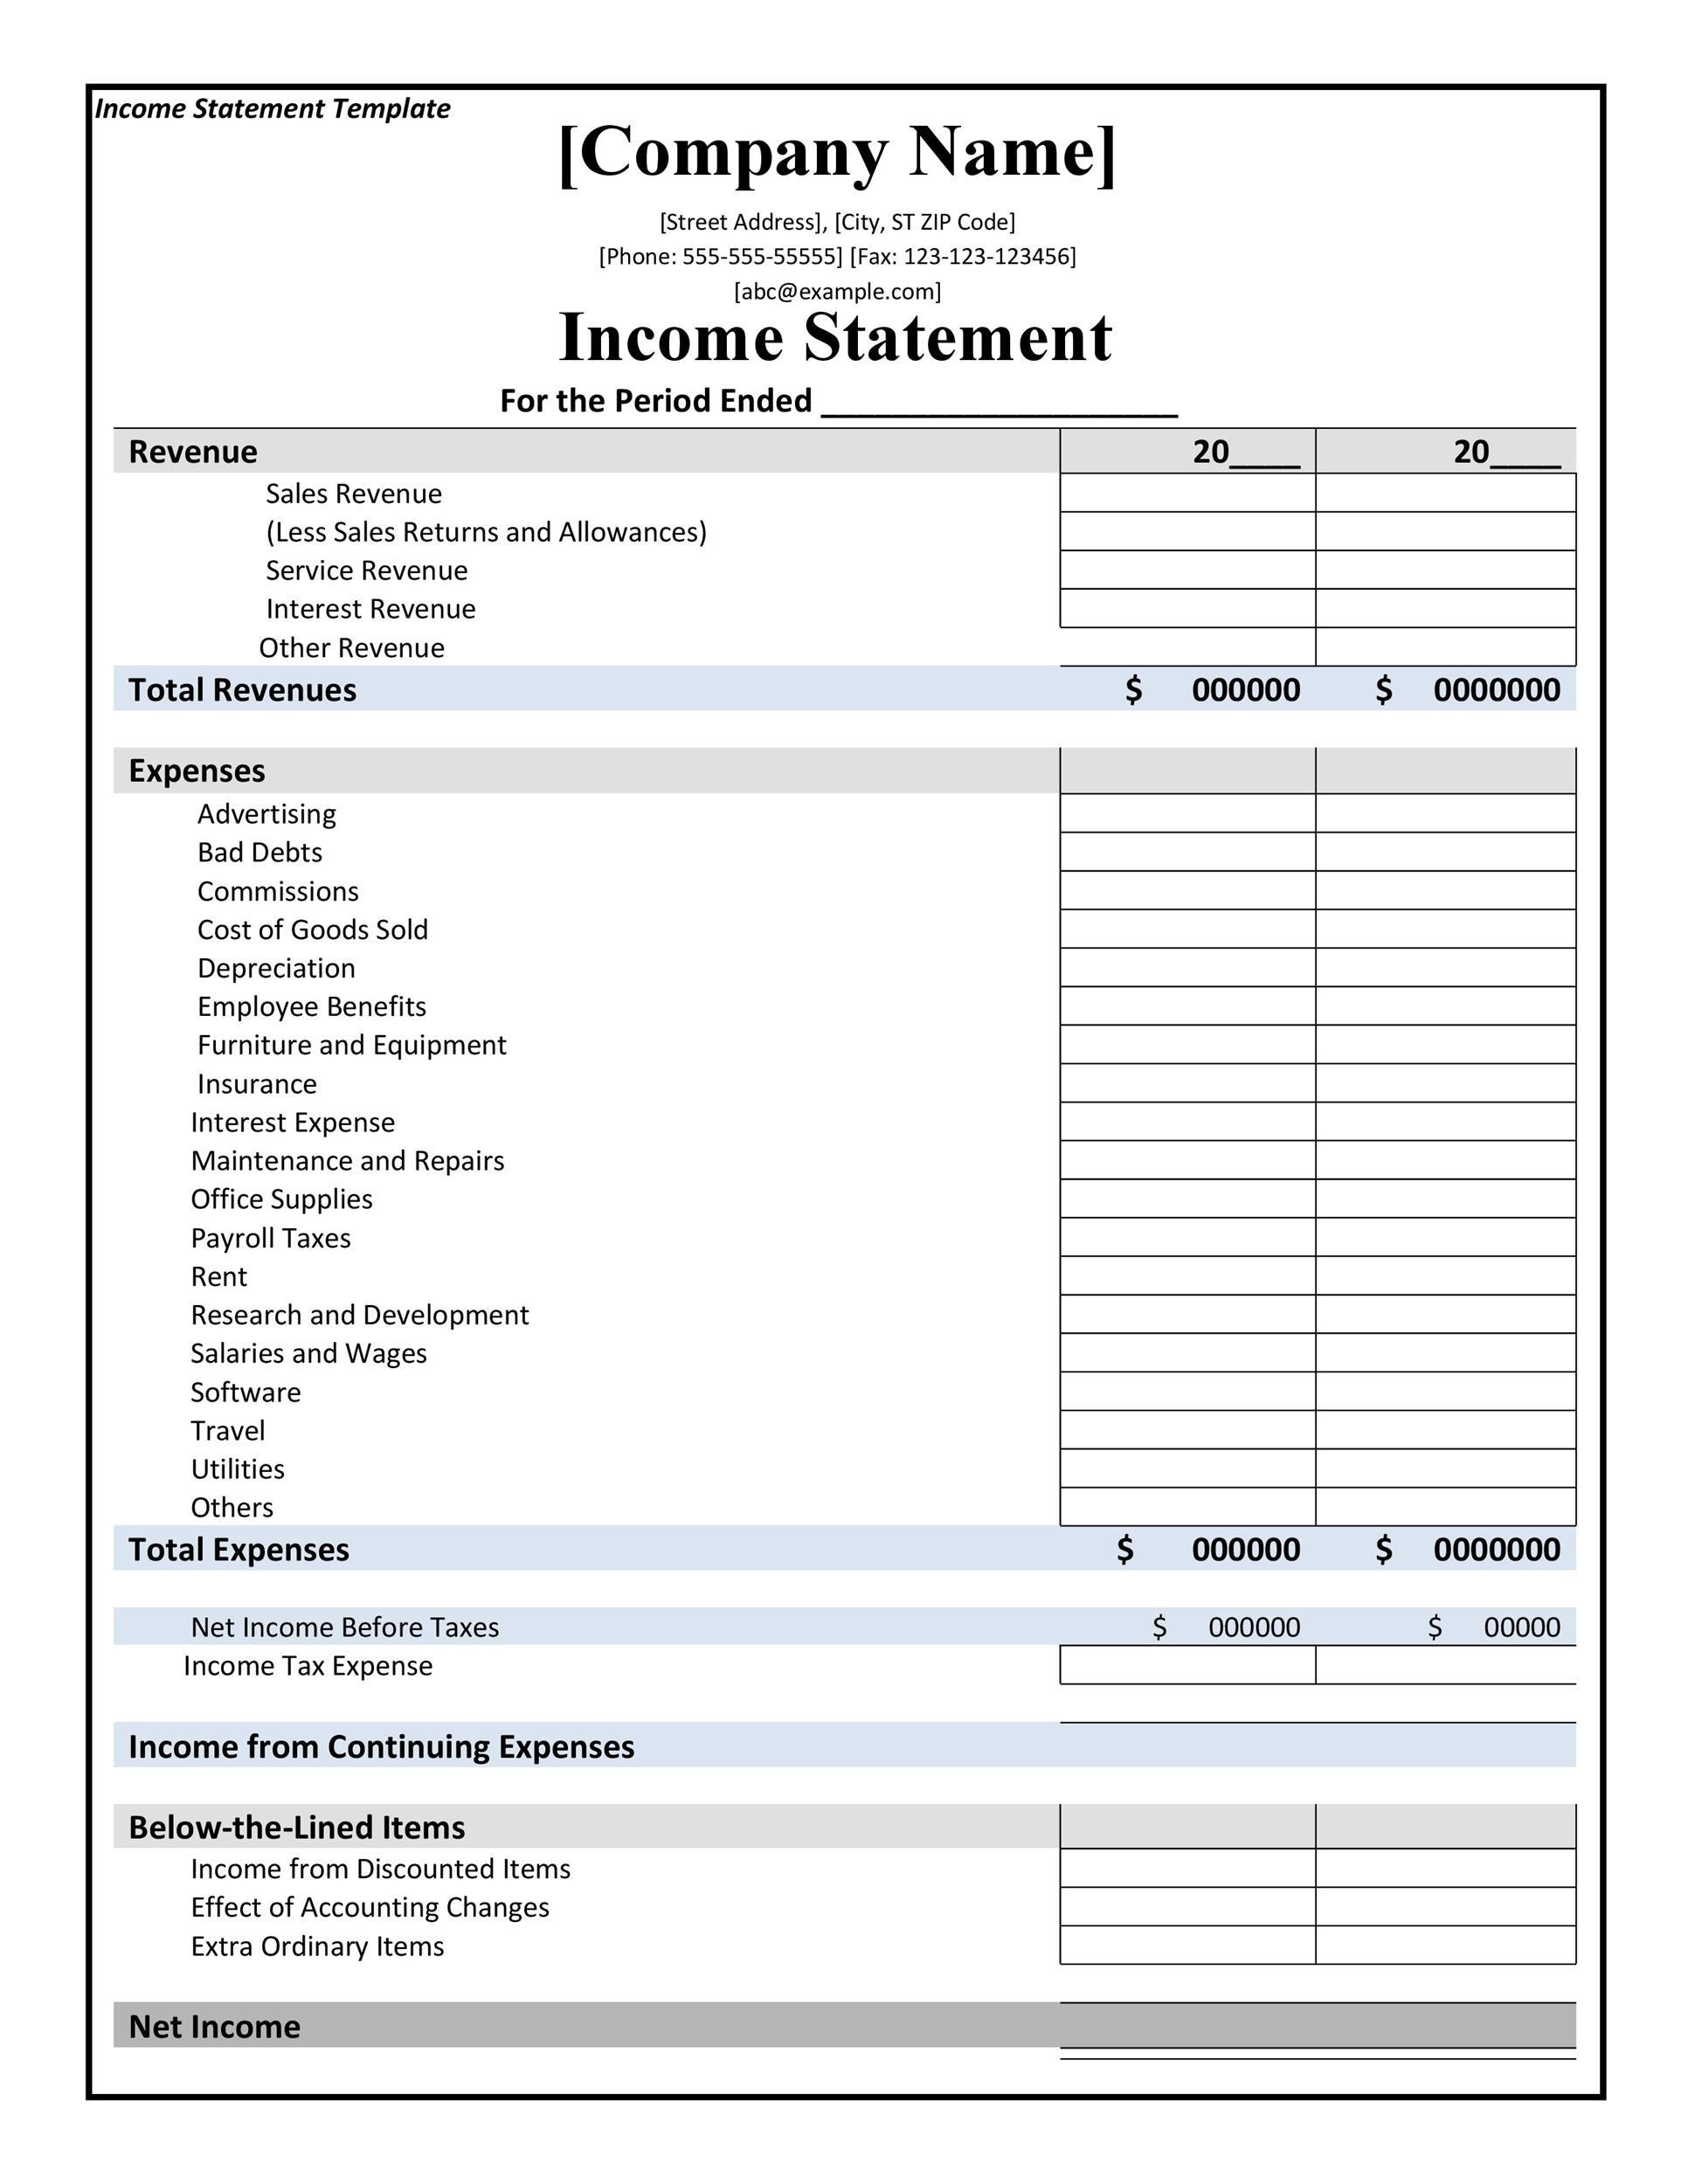 41 FREE Income Statement Templates Examples Template Lab